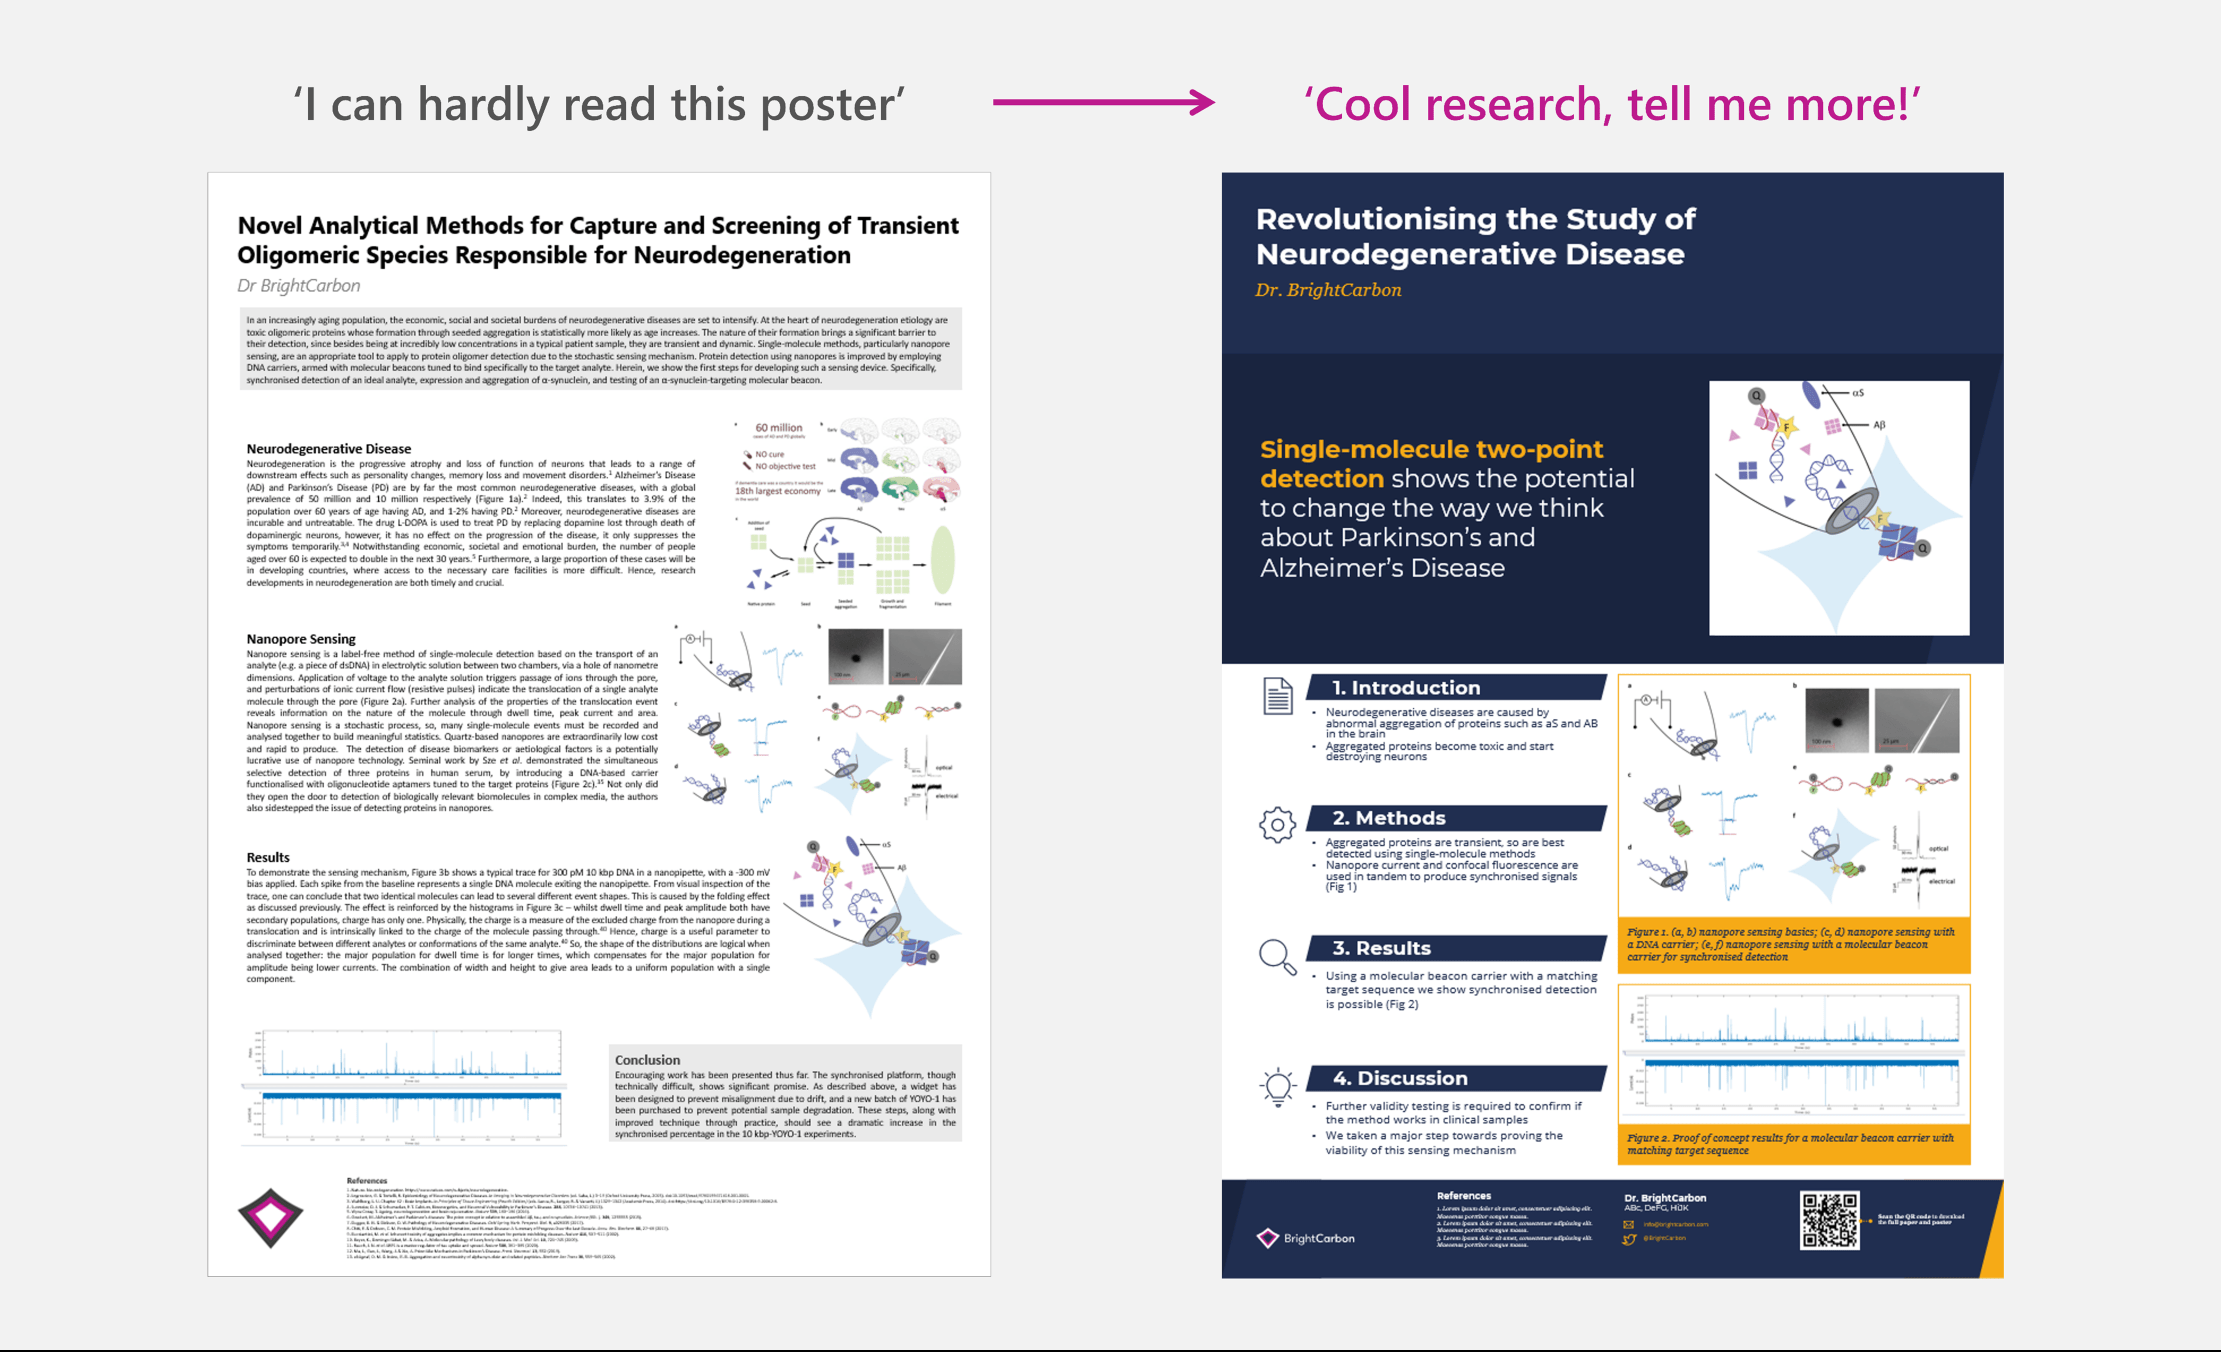 Two posters sit side by side. The poster on the left has lots of small text and cramped diagrams. The poster on the right has much less text, larger diagrams and is well formatted. The text above the left poster says "I can hardly read this poster". The text above the right hand poster says "Cool research, tell me more". 